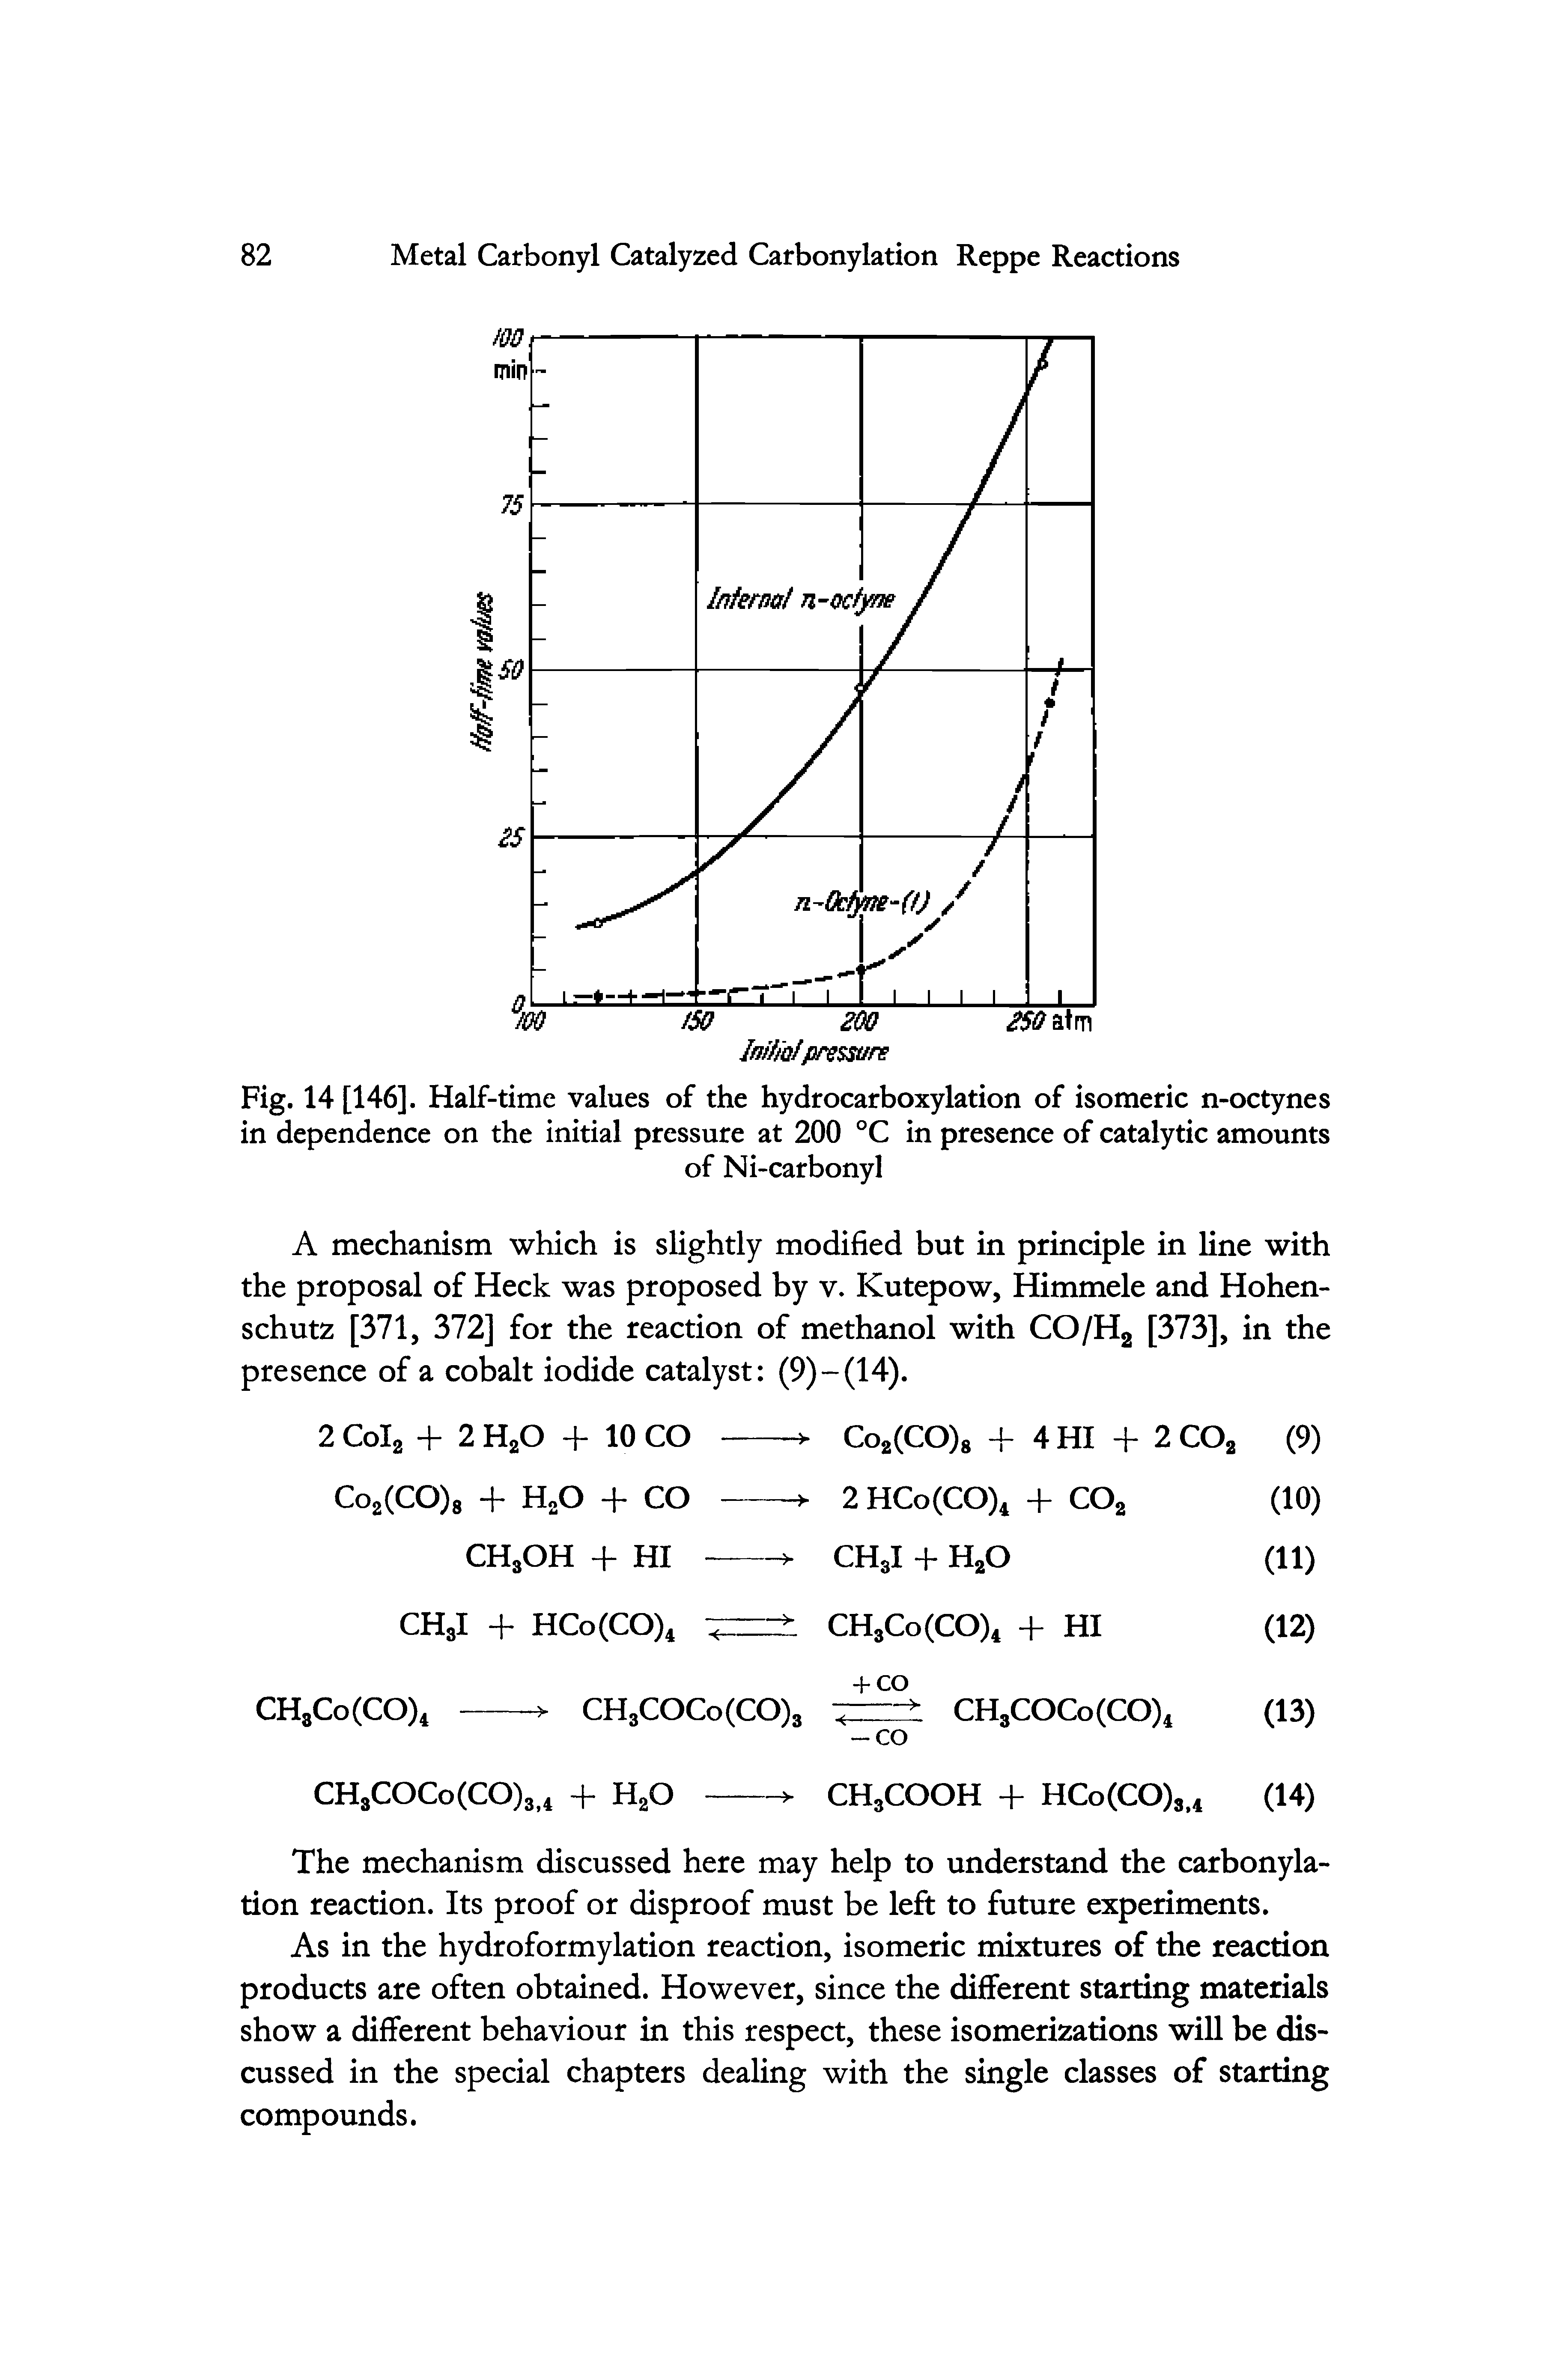 Fig. 14 [146]. Half-time values of the hydrocarboxylation of isomeric n-octynes in dependence on the initial pressure at 200 °C in presence of catalytic amounts...